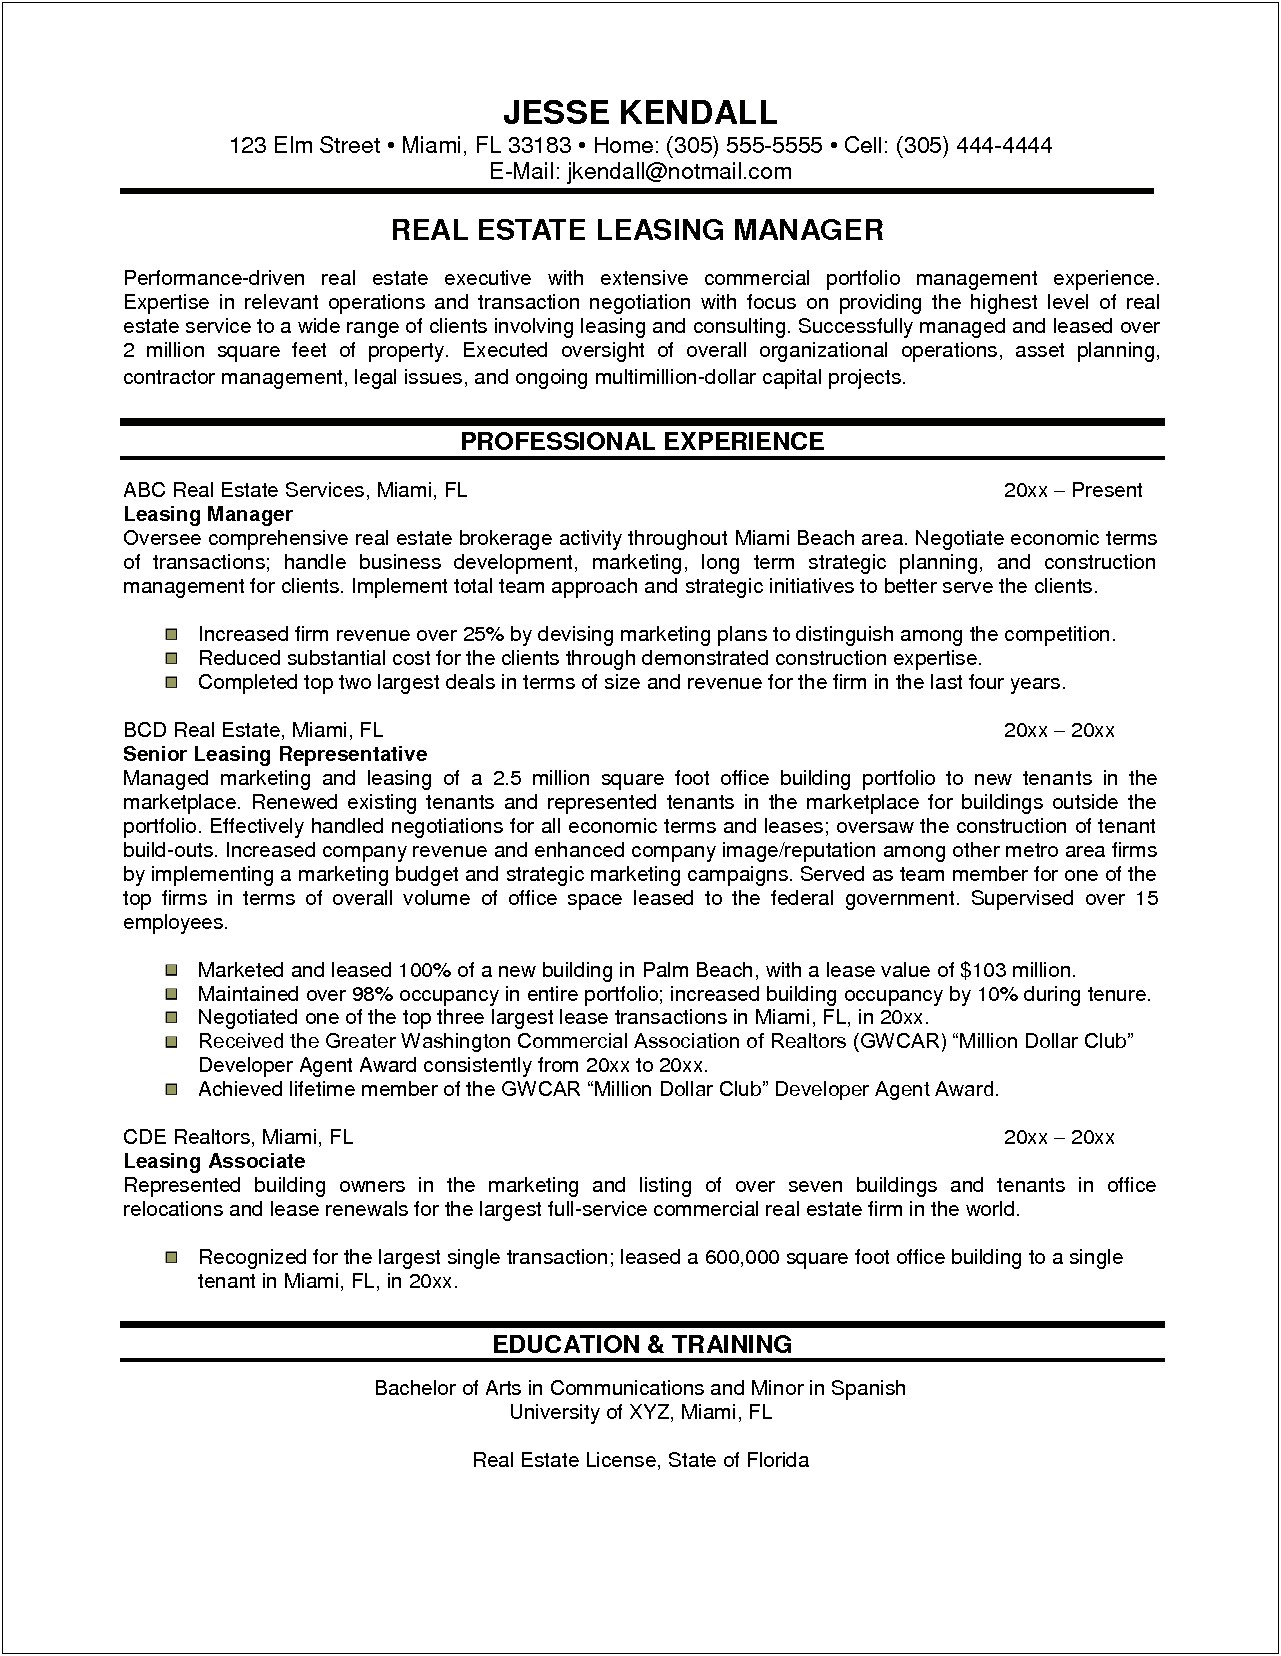 Resume Of A Real Estate Transaction Manager